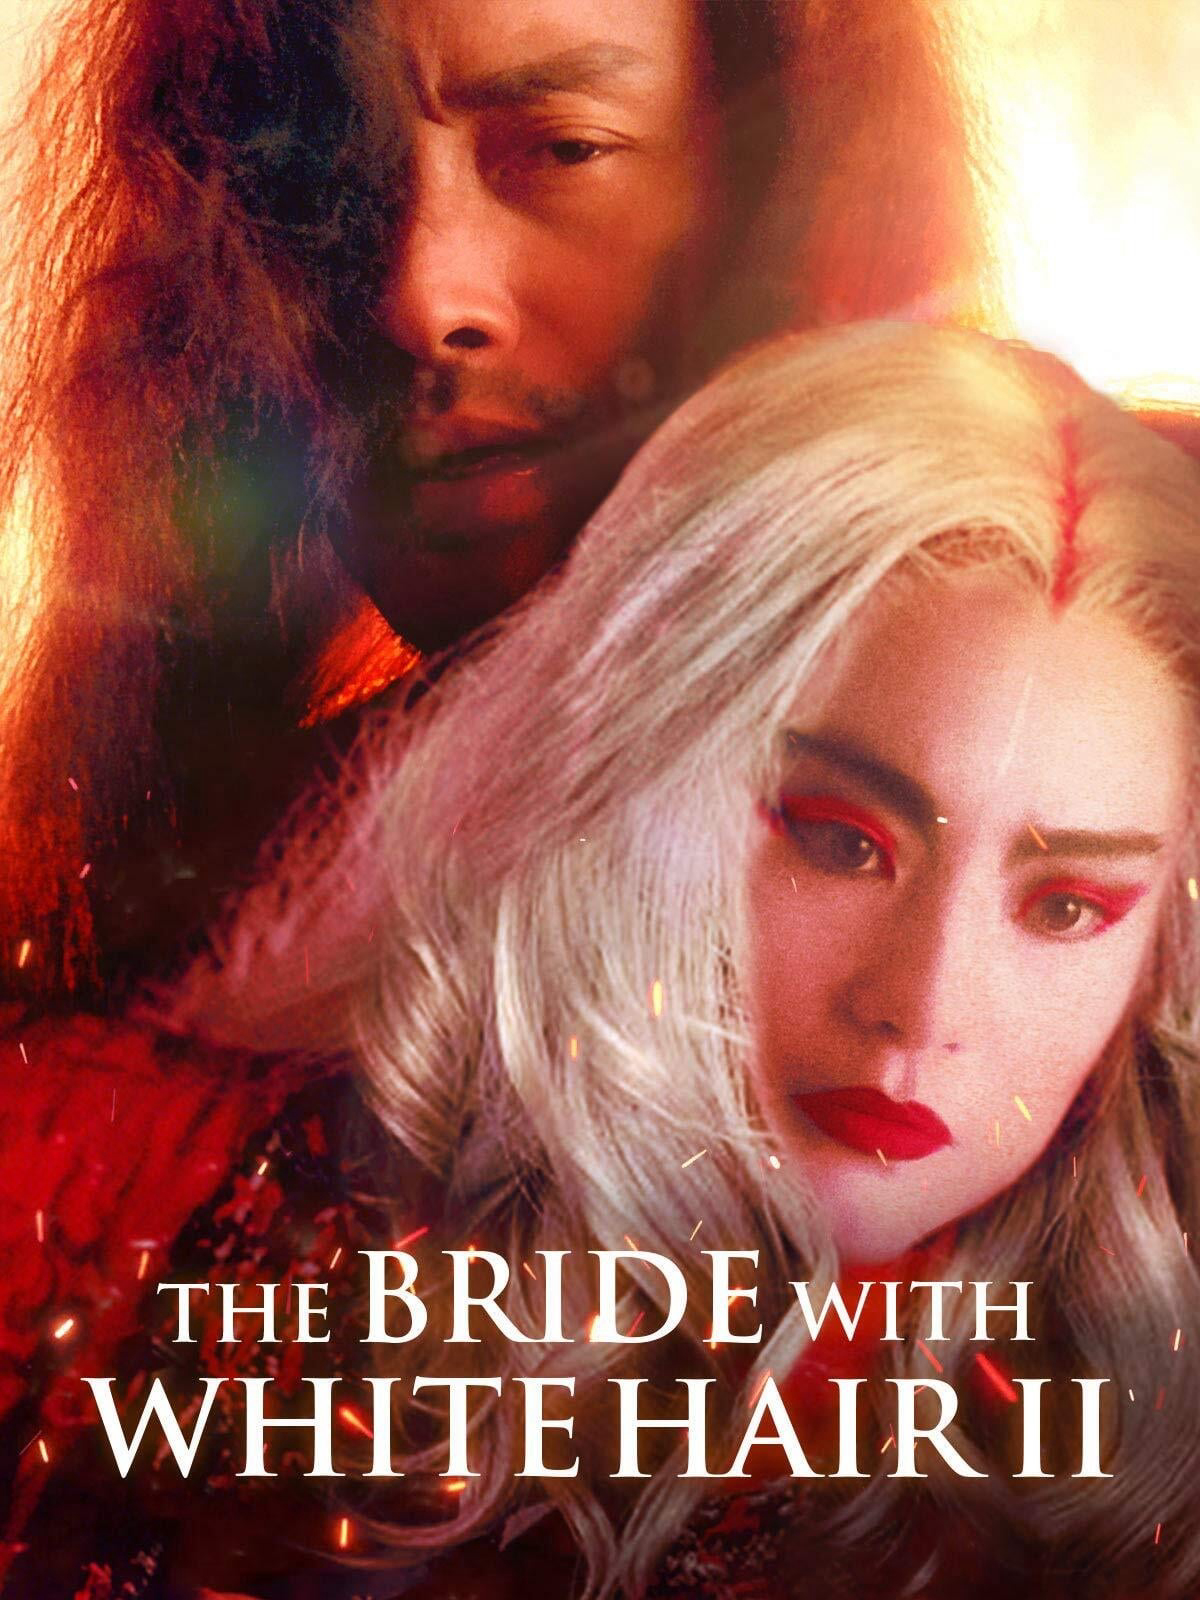 The Bride with White Hair 2 - The Bride with White Hair 2